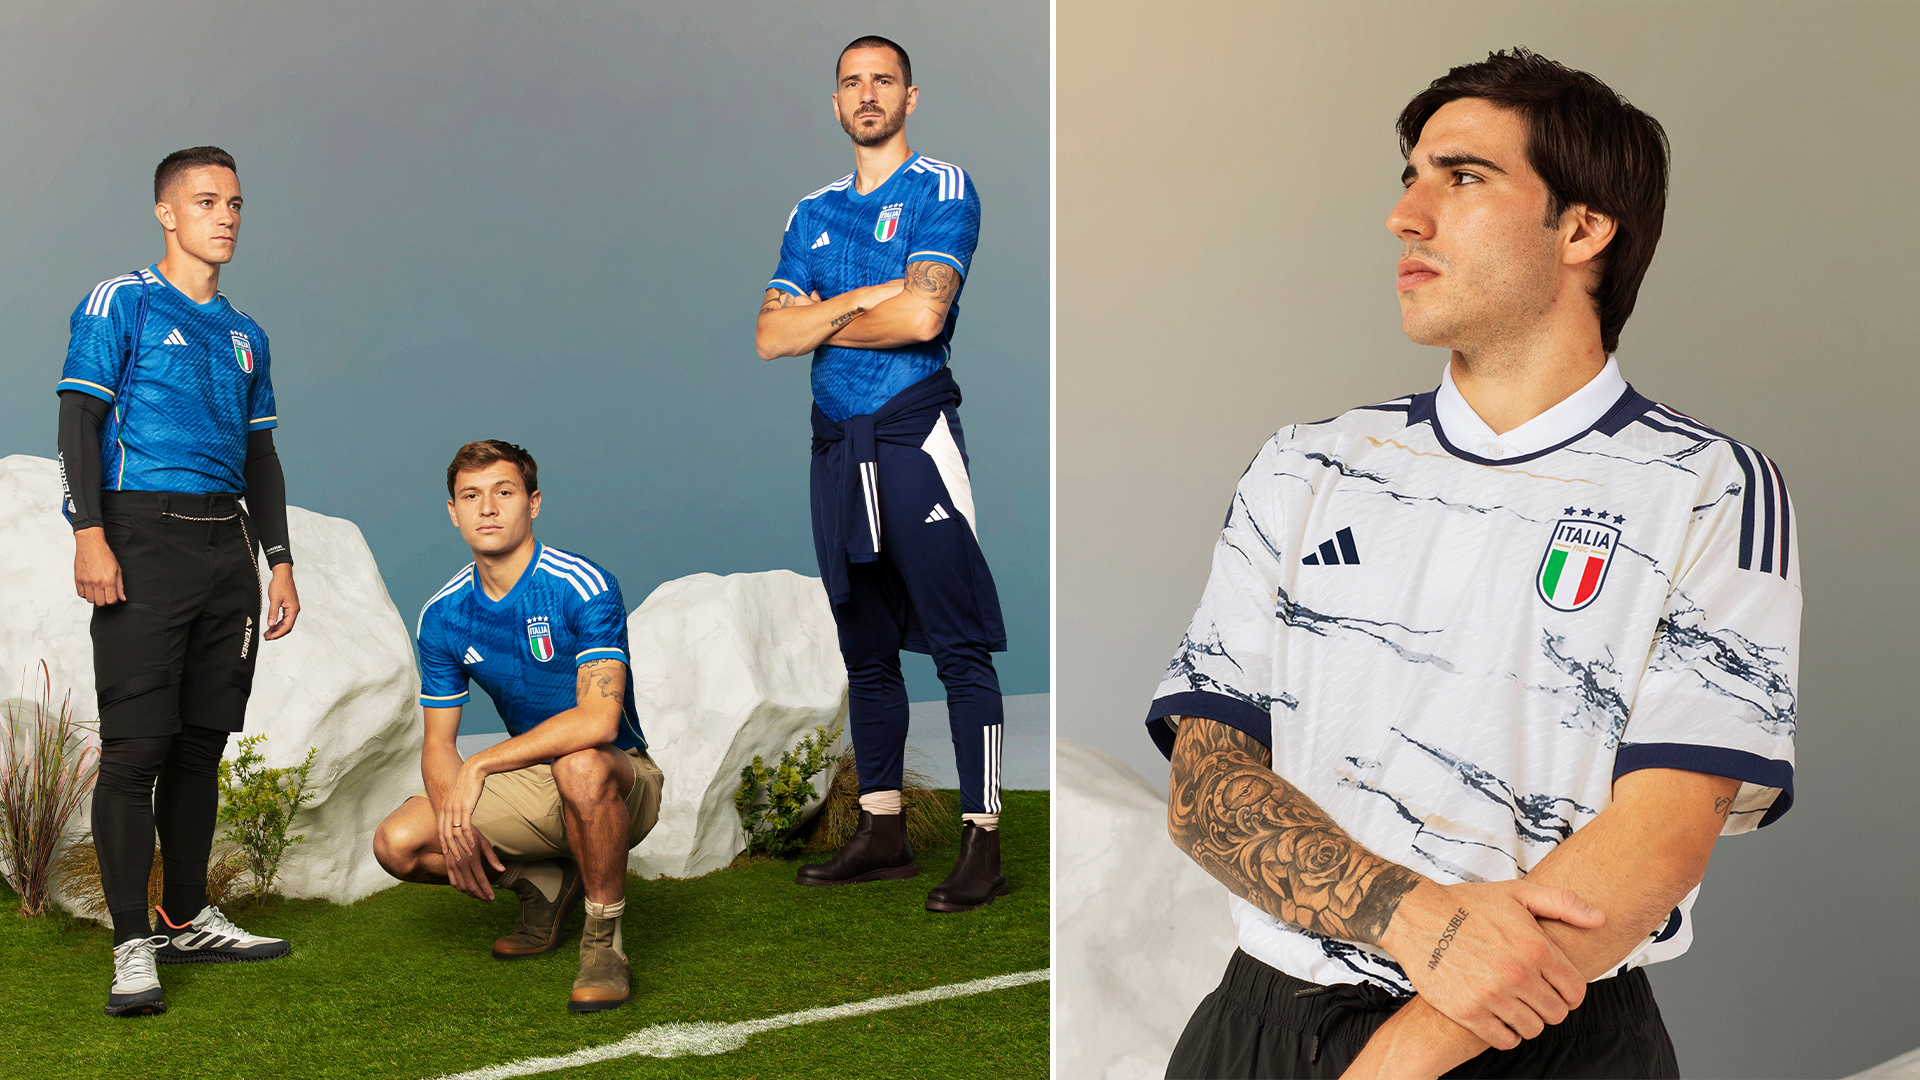 Encogimiento Reparador buffet adidas and Italy unveil the all-new Italy 23 kits infused with Italian  heritage | Goal.com US